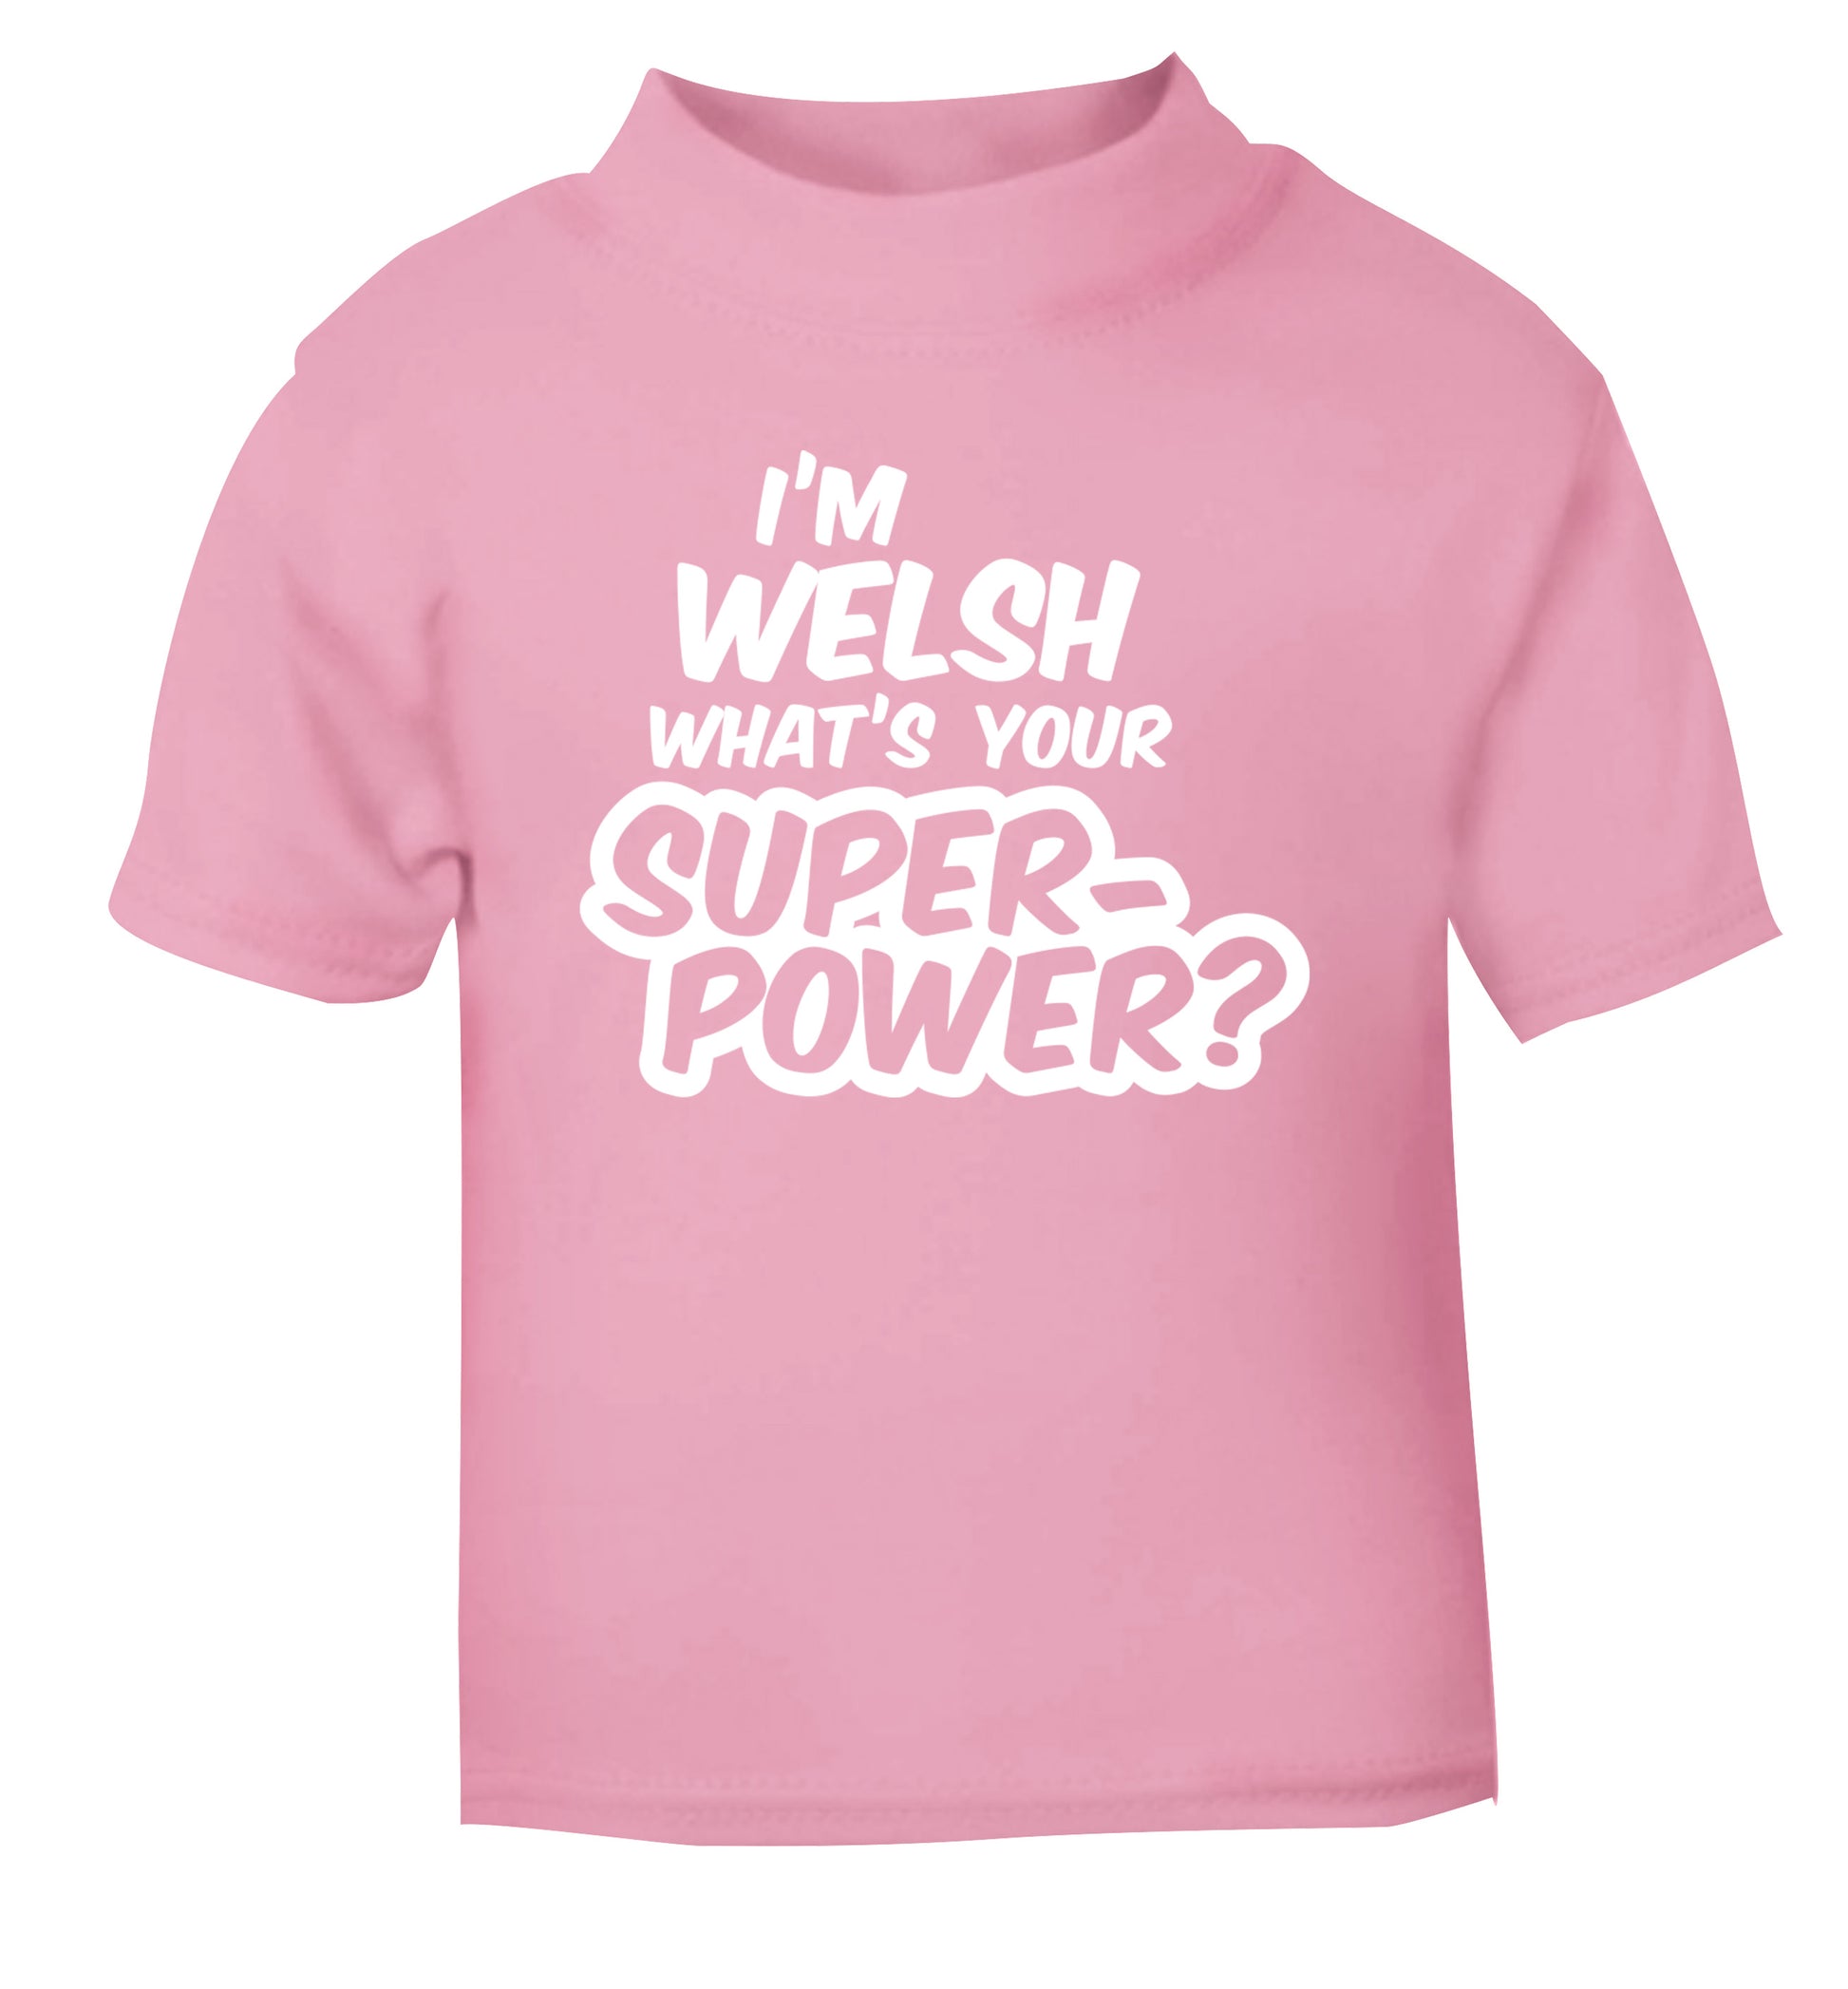 I'm Welsh what's your superpower? light pink Baby Toddler Tshirt 2 Years